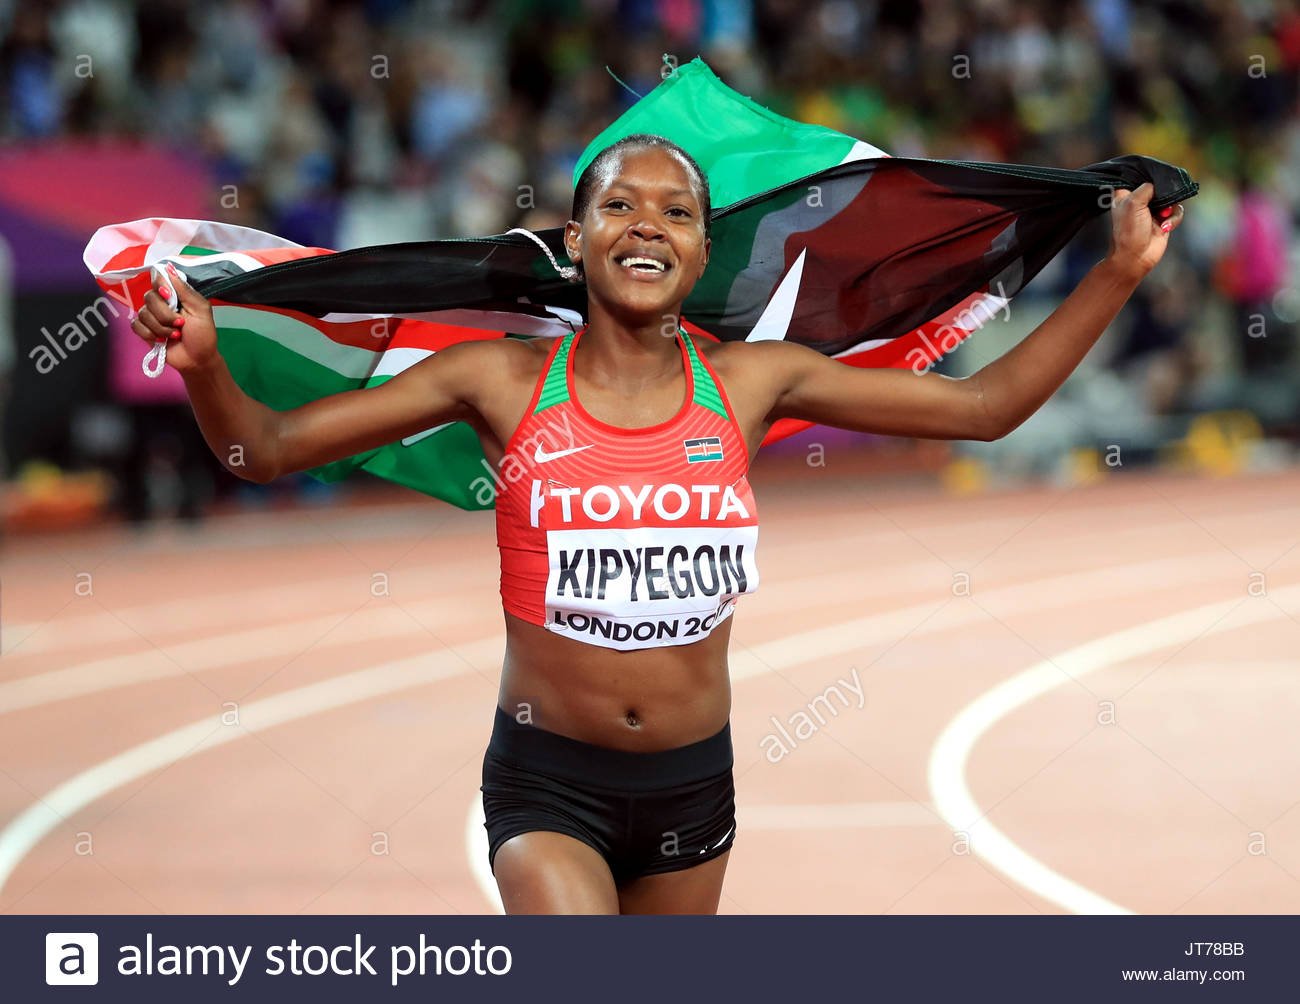 Faith Chepngetich Wins 1,500m Gold In Tokyo And Sets New Olympic RecordA